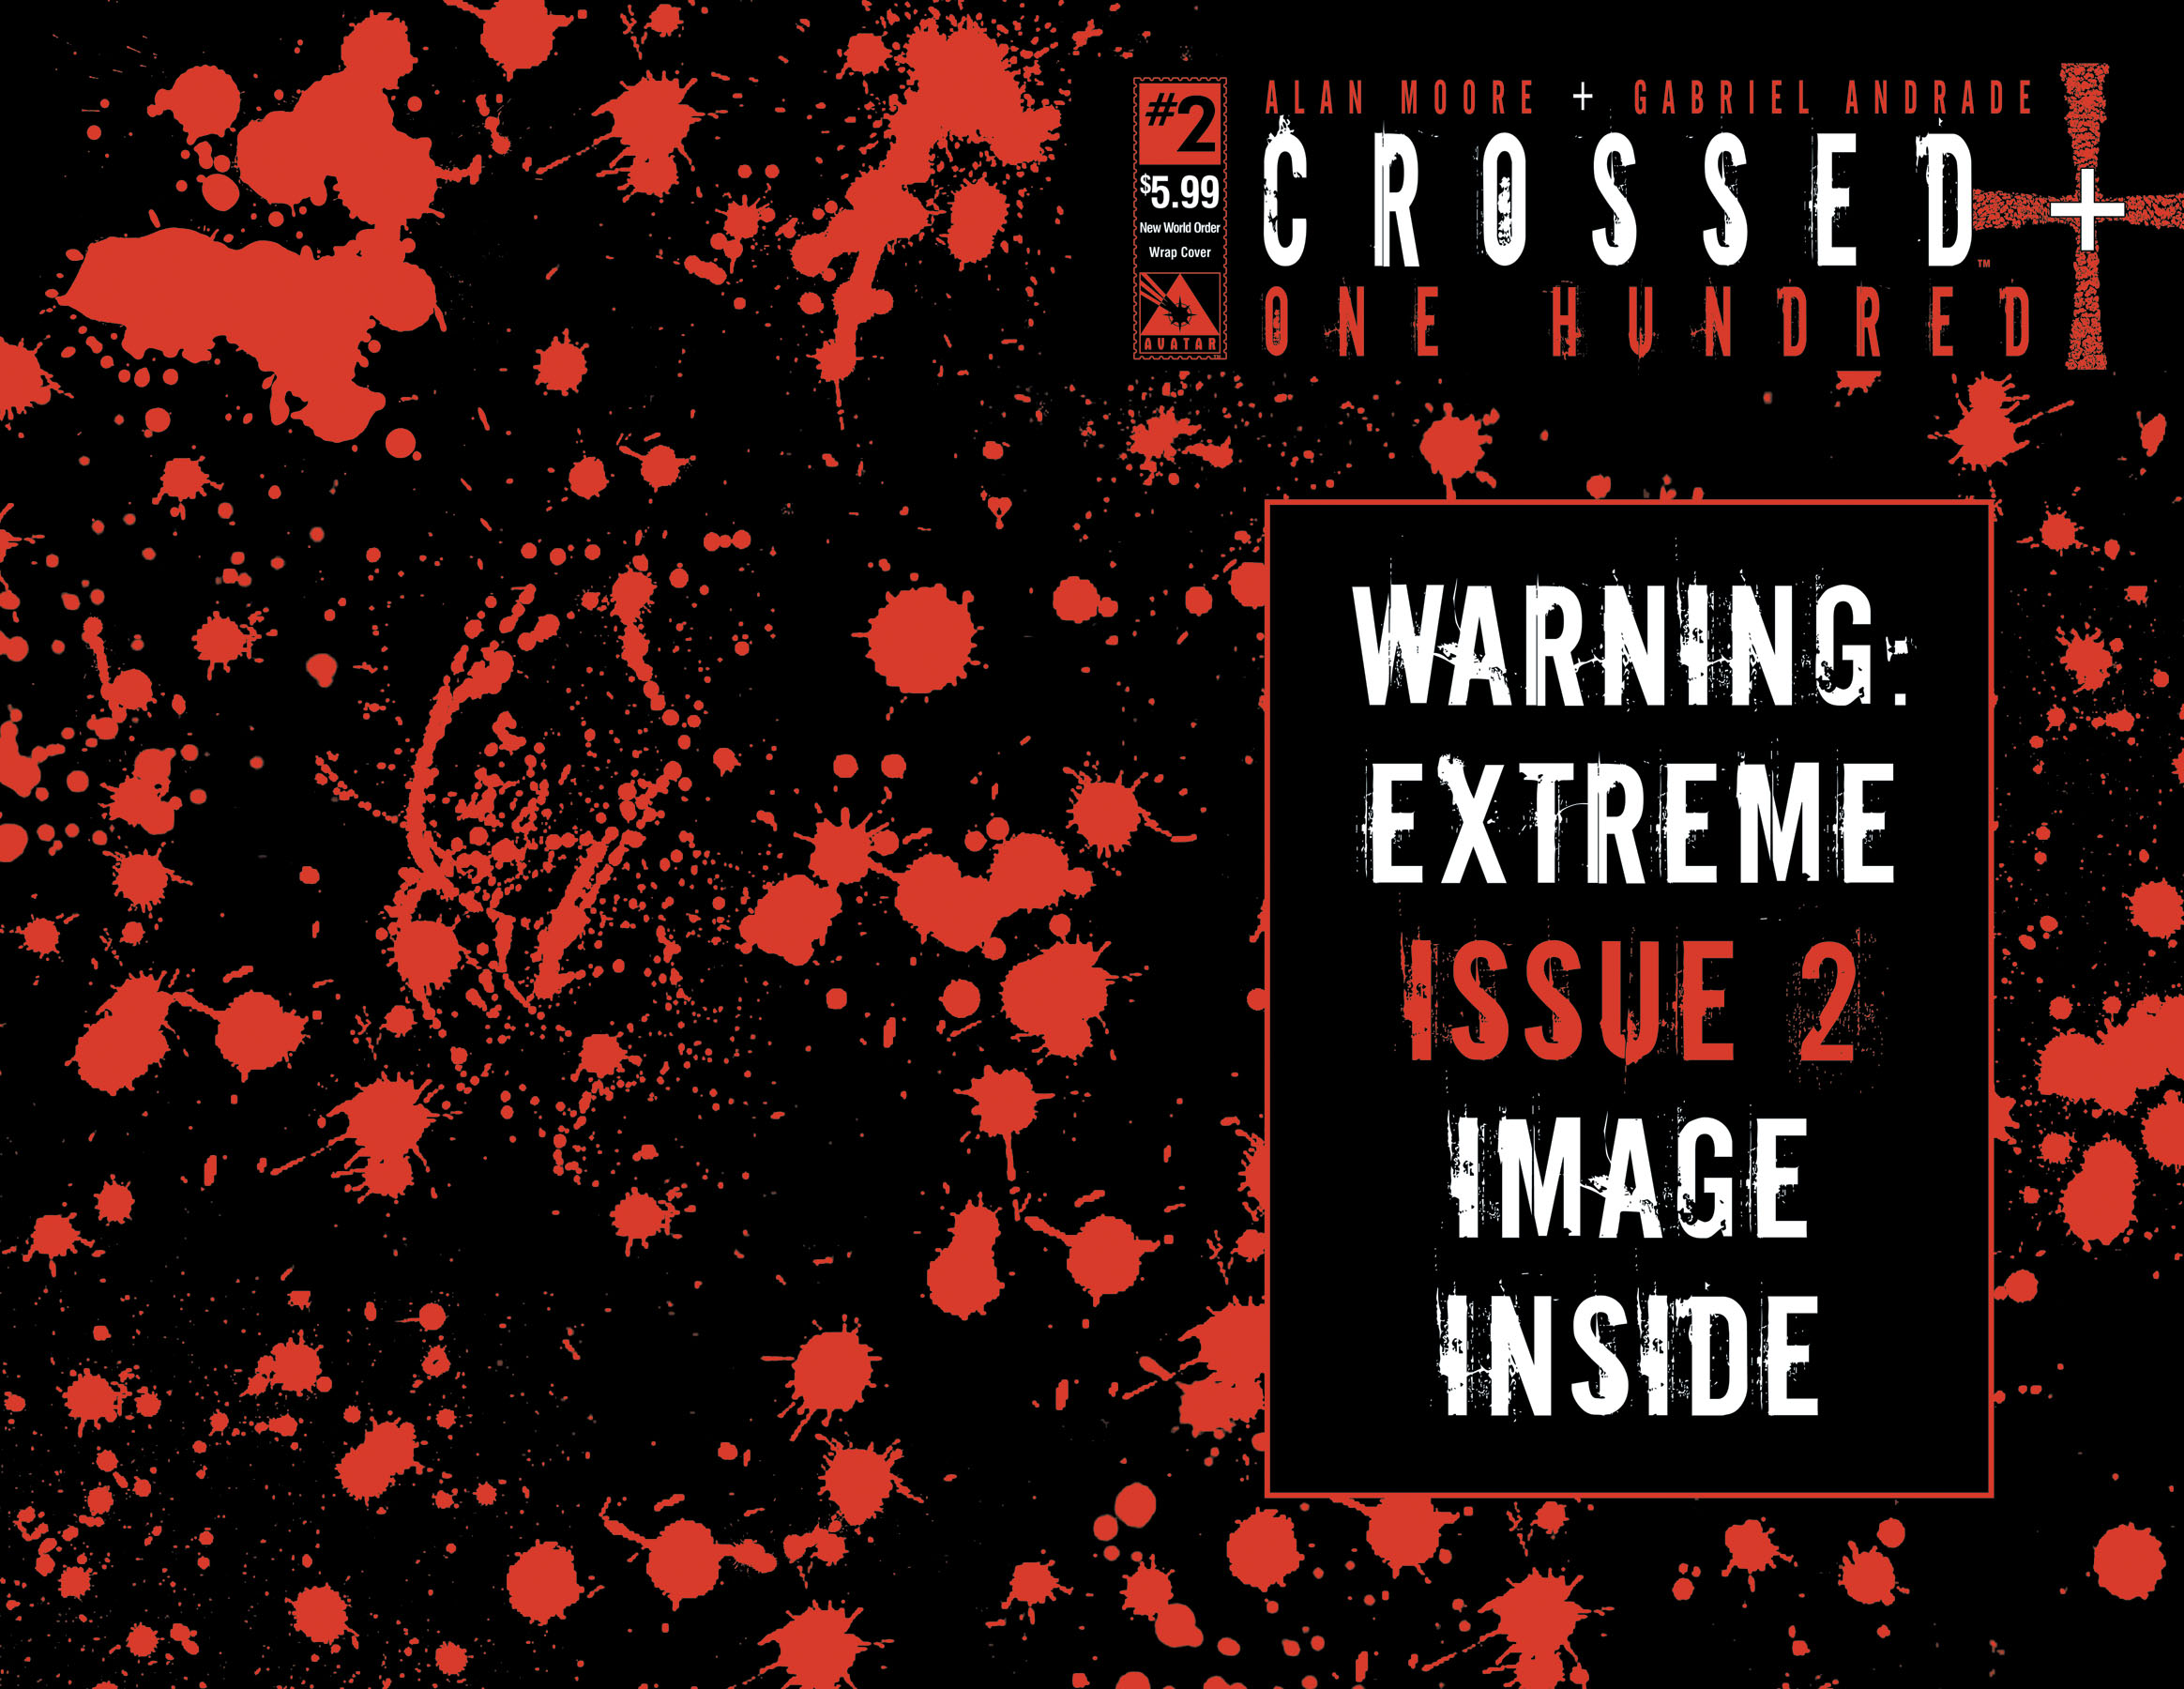 Read online Crossed Plus One Hundred comic -  Issue #2 - 7